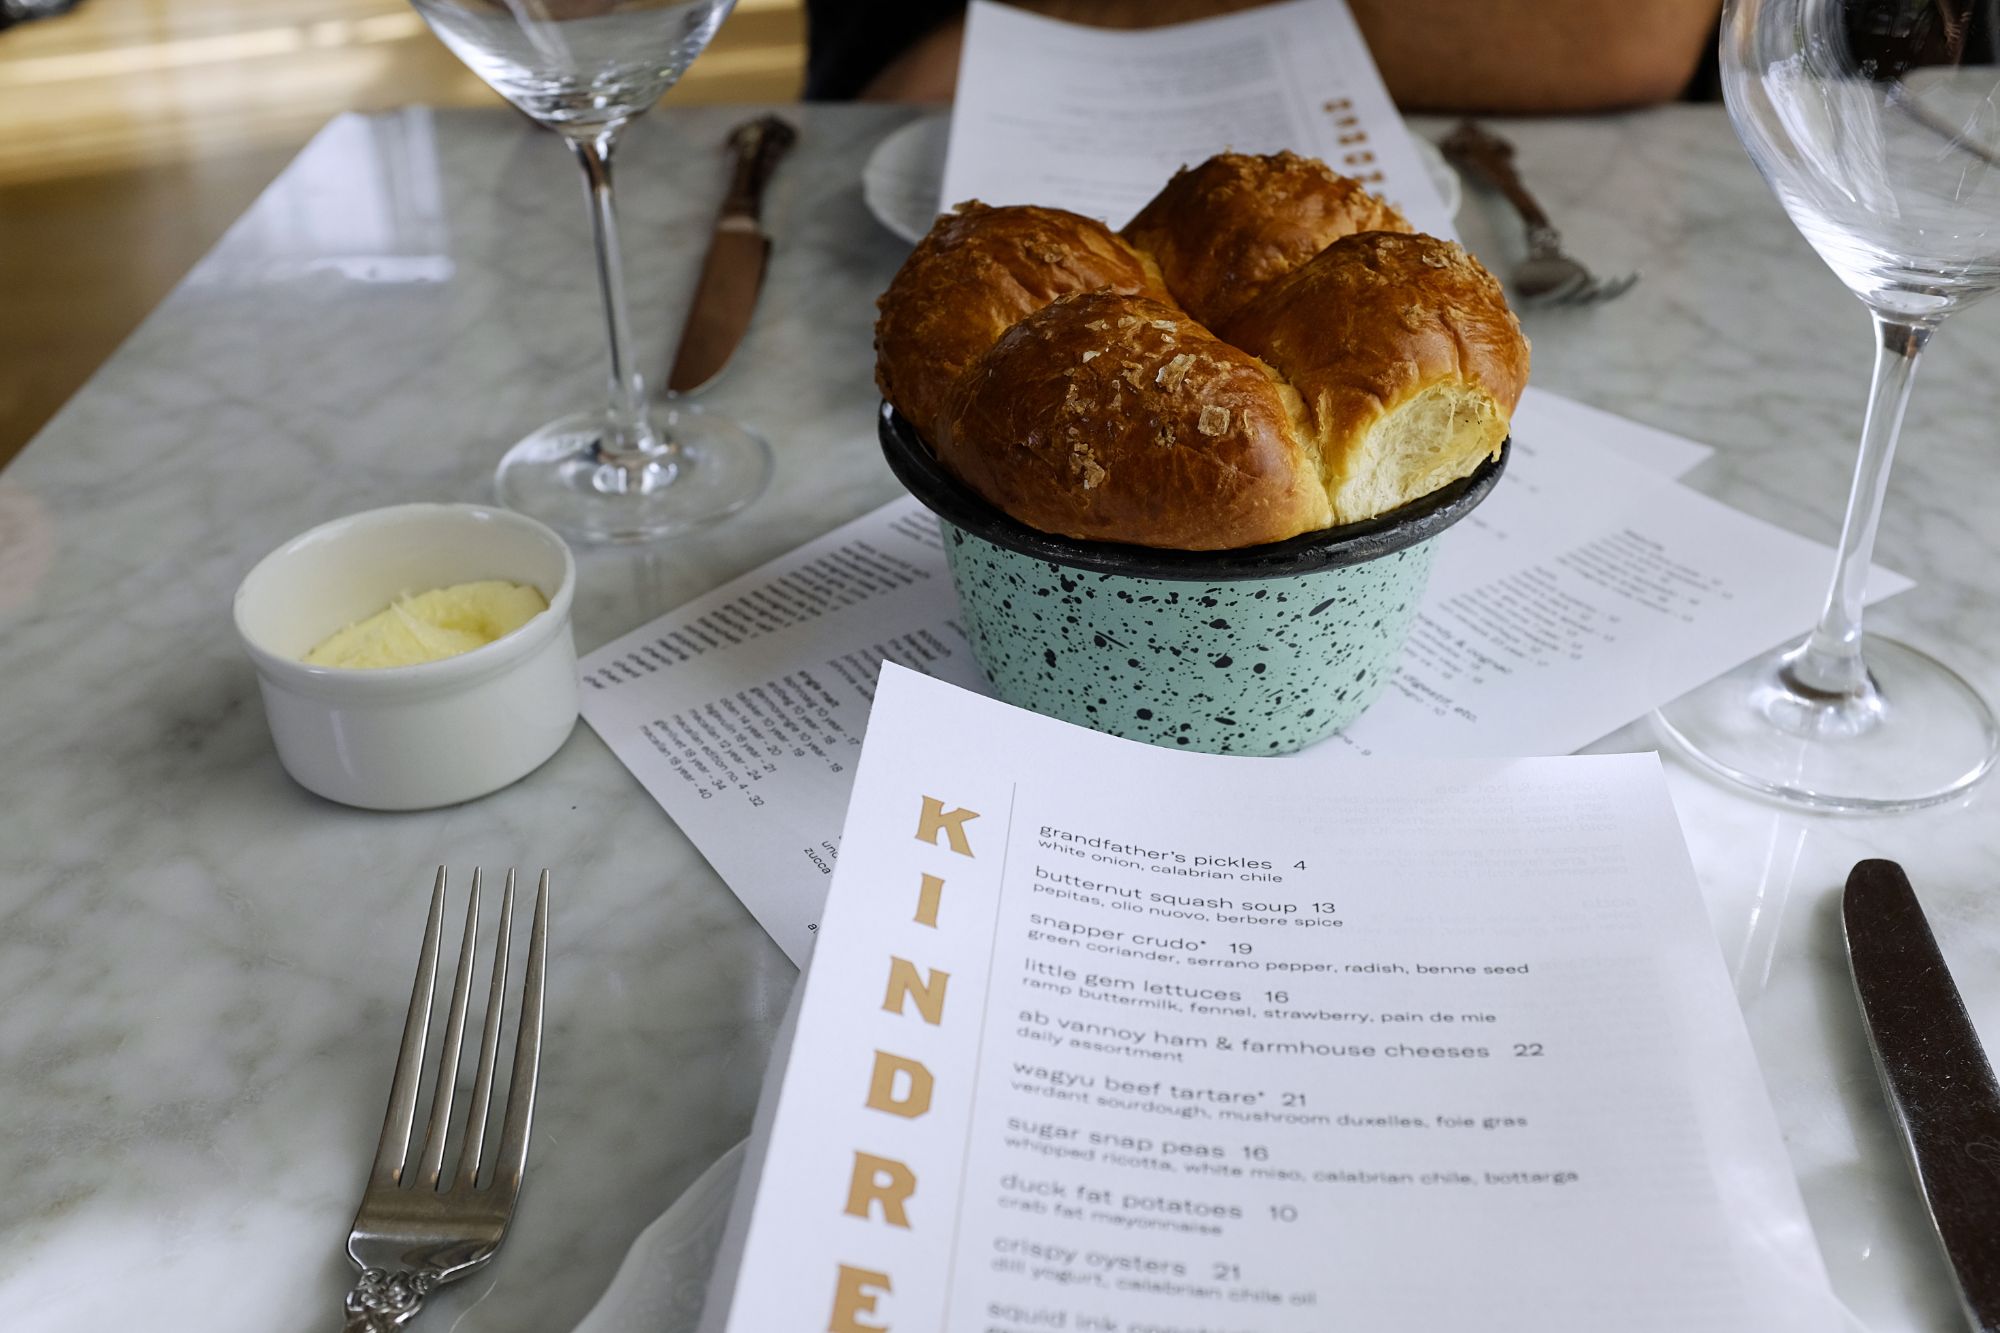 Milkbread on the table at Kindred